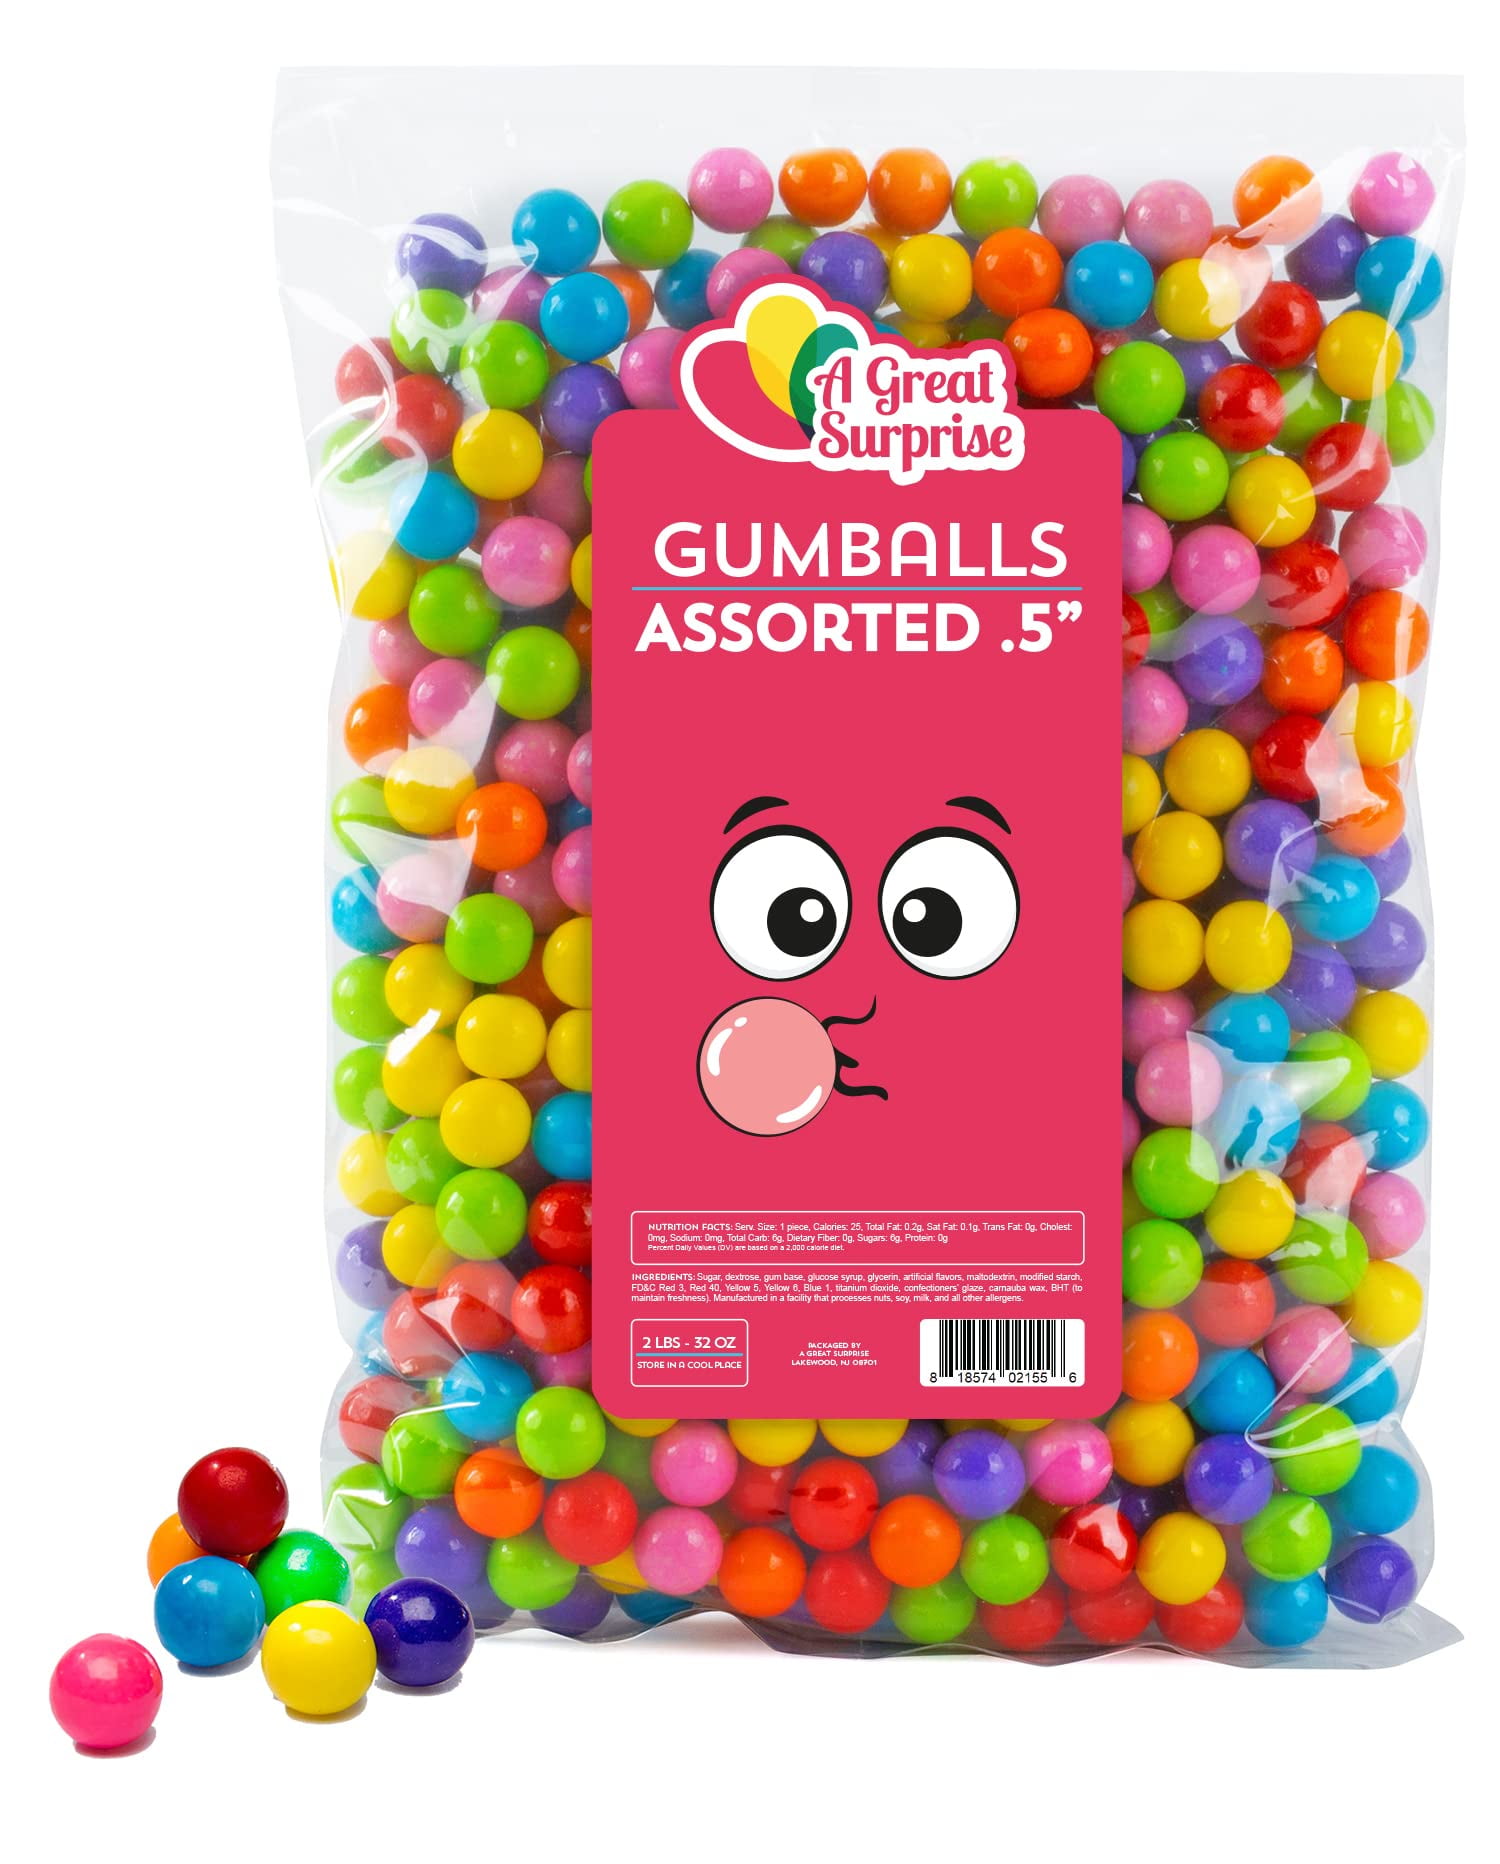 .com : White Gumballs - White Candy for Candy Buffet - Apx. 620  Gumballs - 2 Pounds - Mini Shimmer Gumballs 1/2 Inch - White Candy - Bulk  Candy : Grocery & Gourmet Food